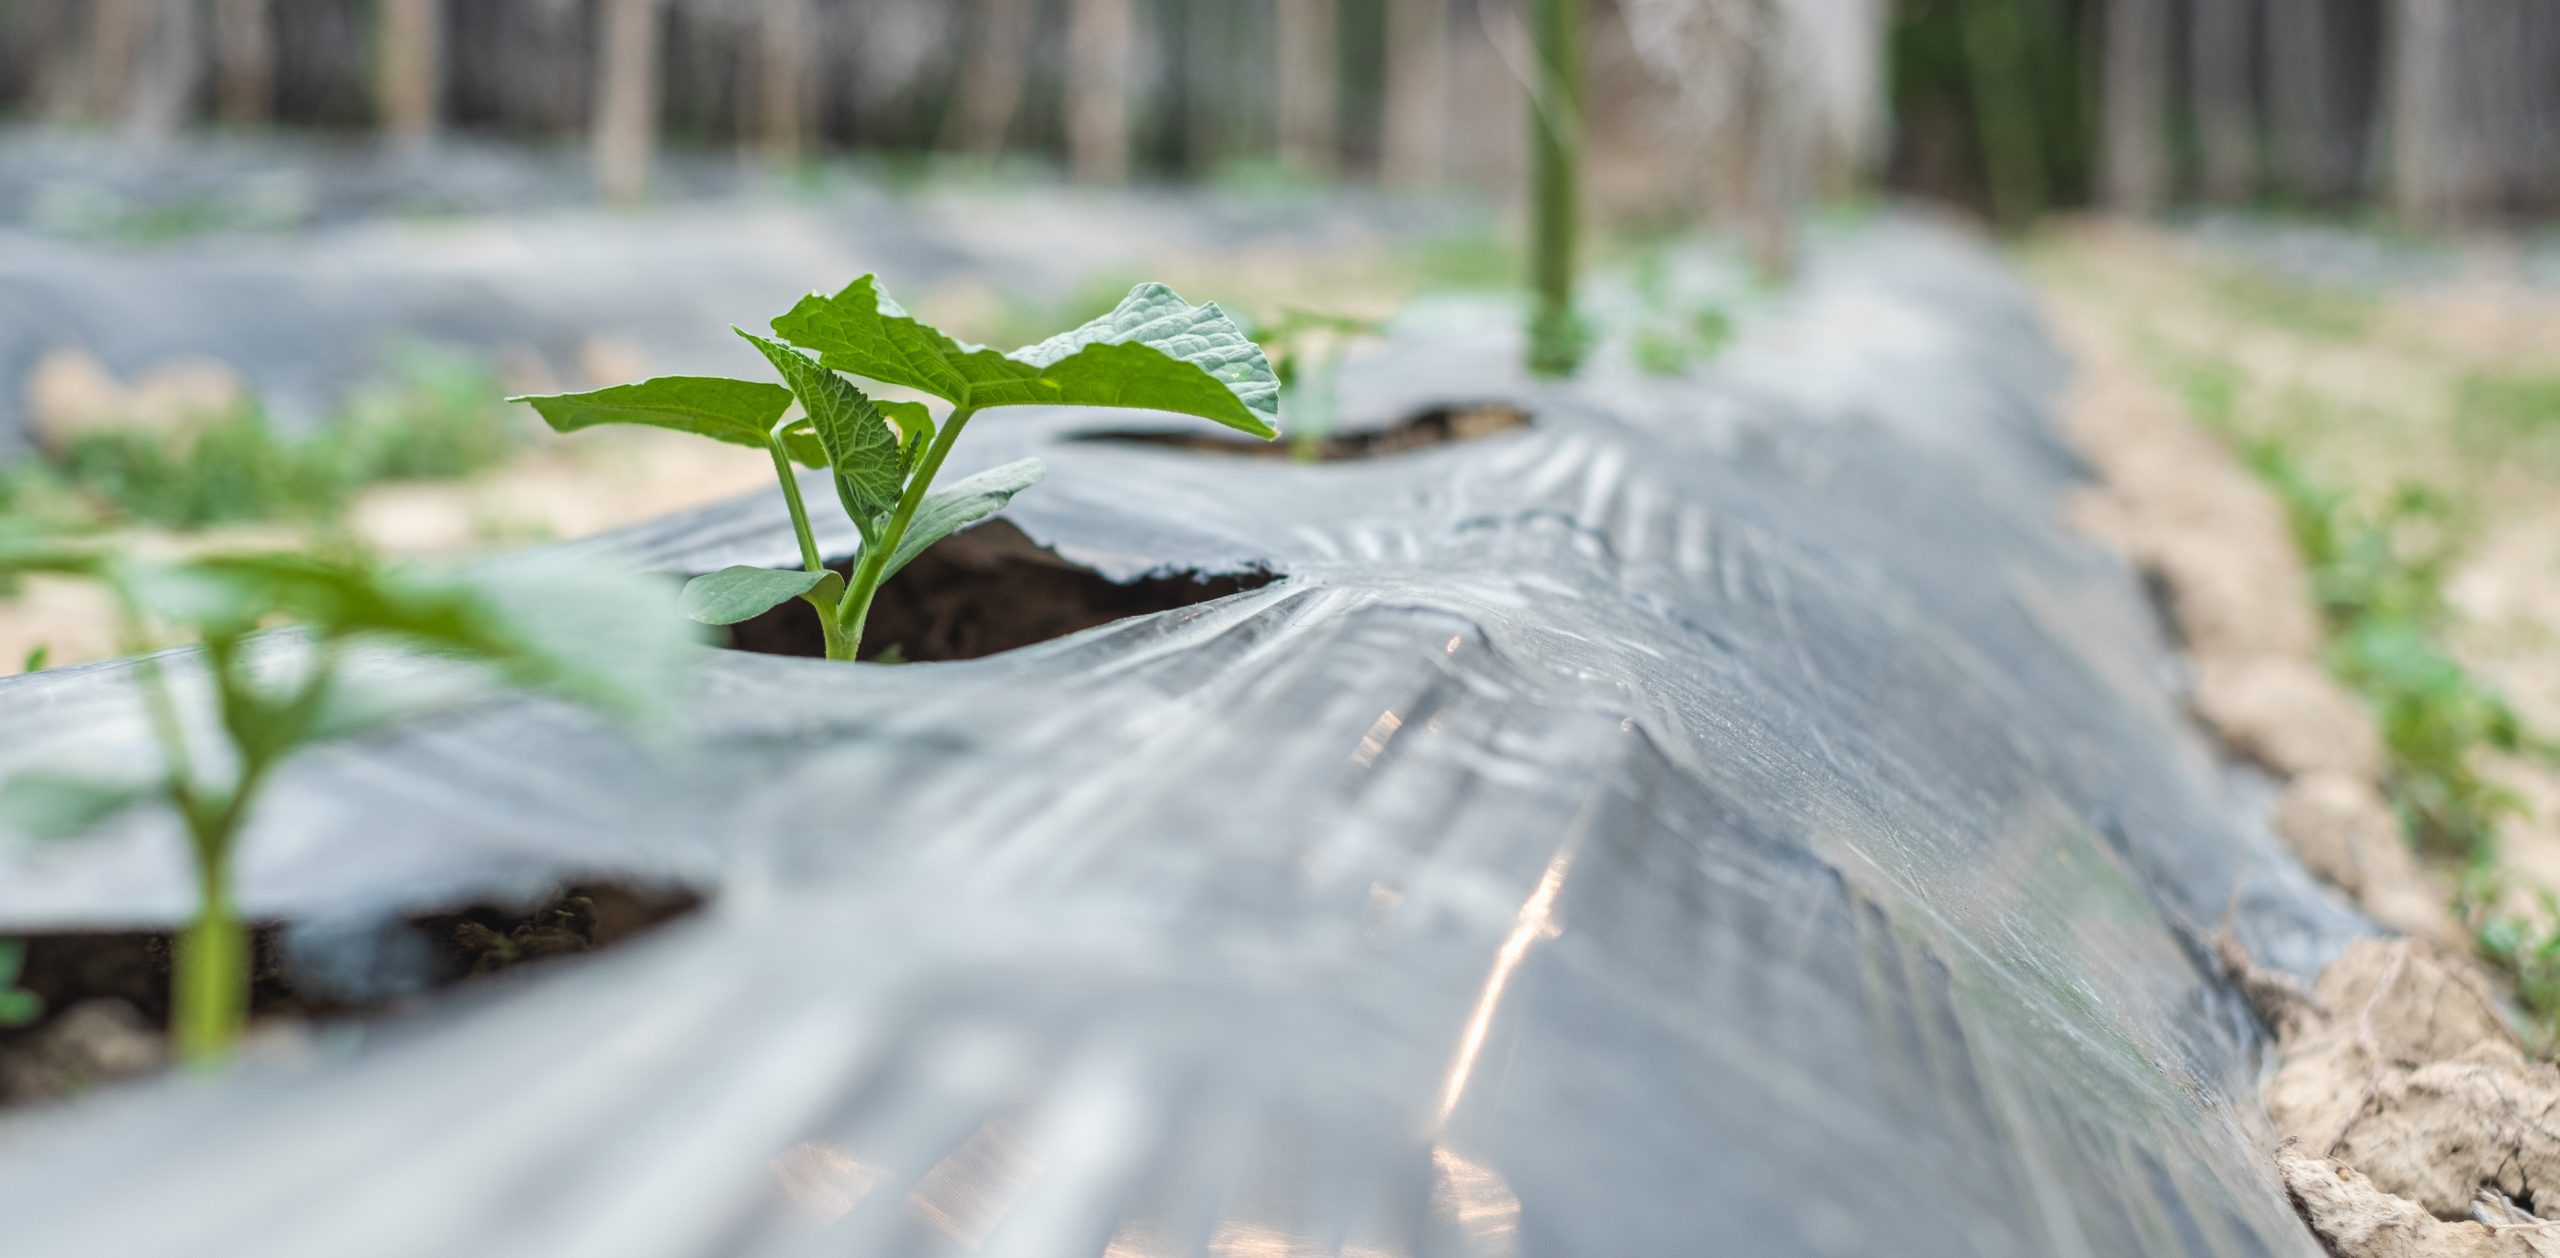 Row of baby tree on soil covered by plastic or mulching film in